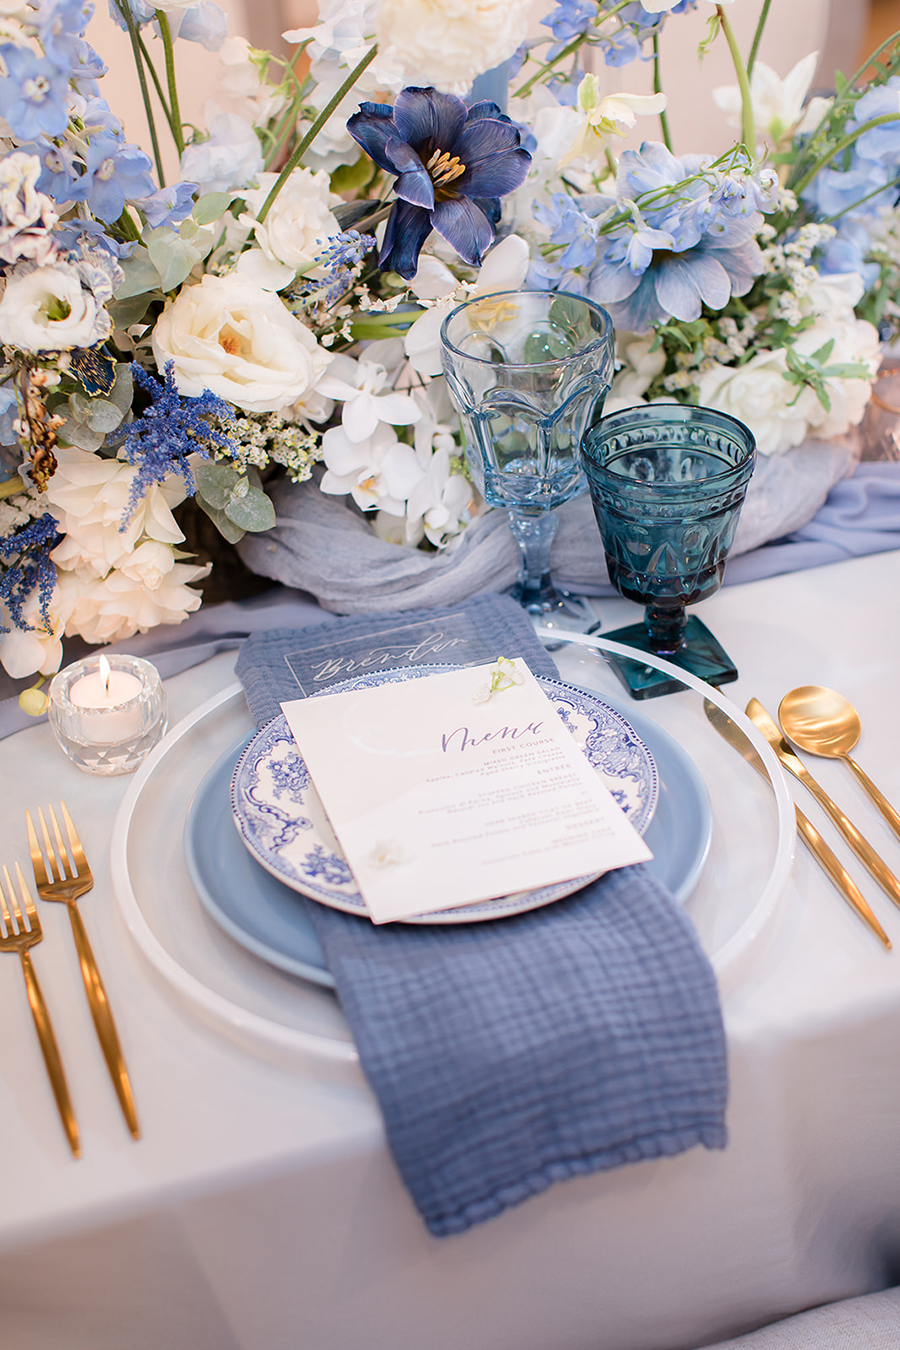 ten wedding tablescape ideas, custom menu cards, acrylic calligraphy place cards, lace and belle, Idalia Photography